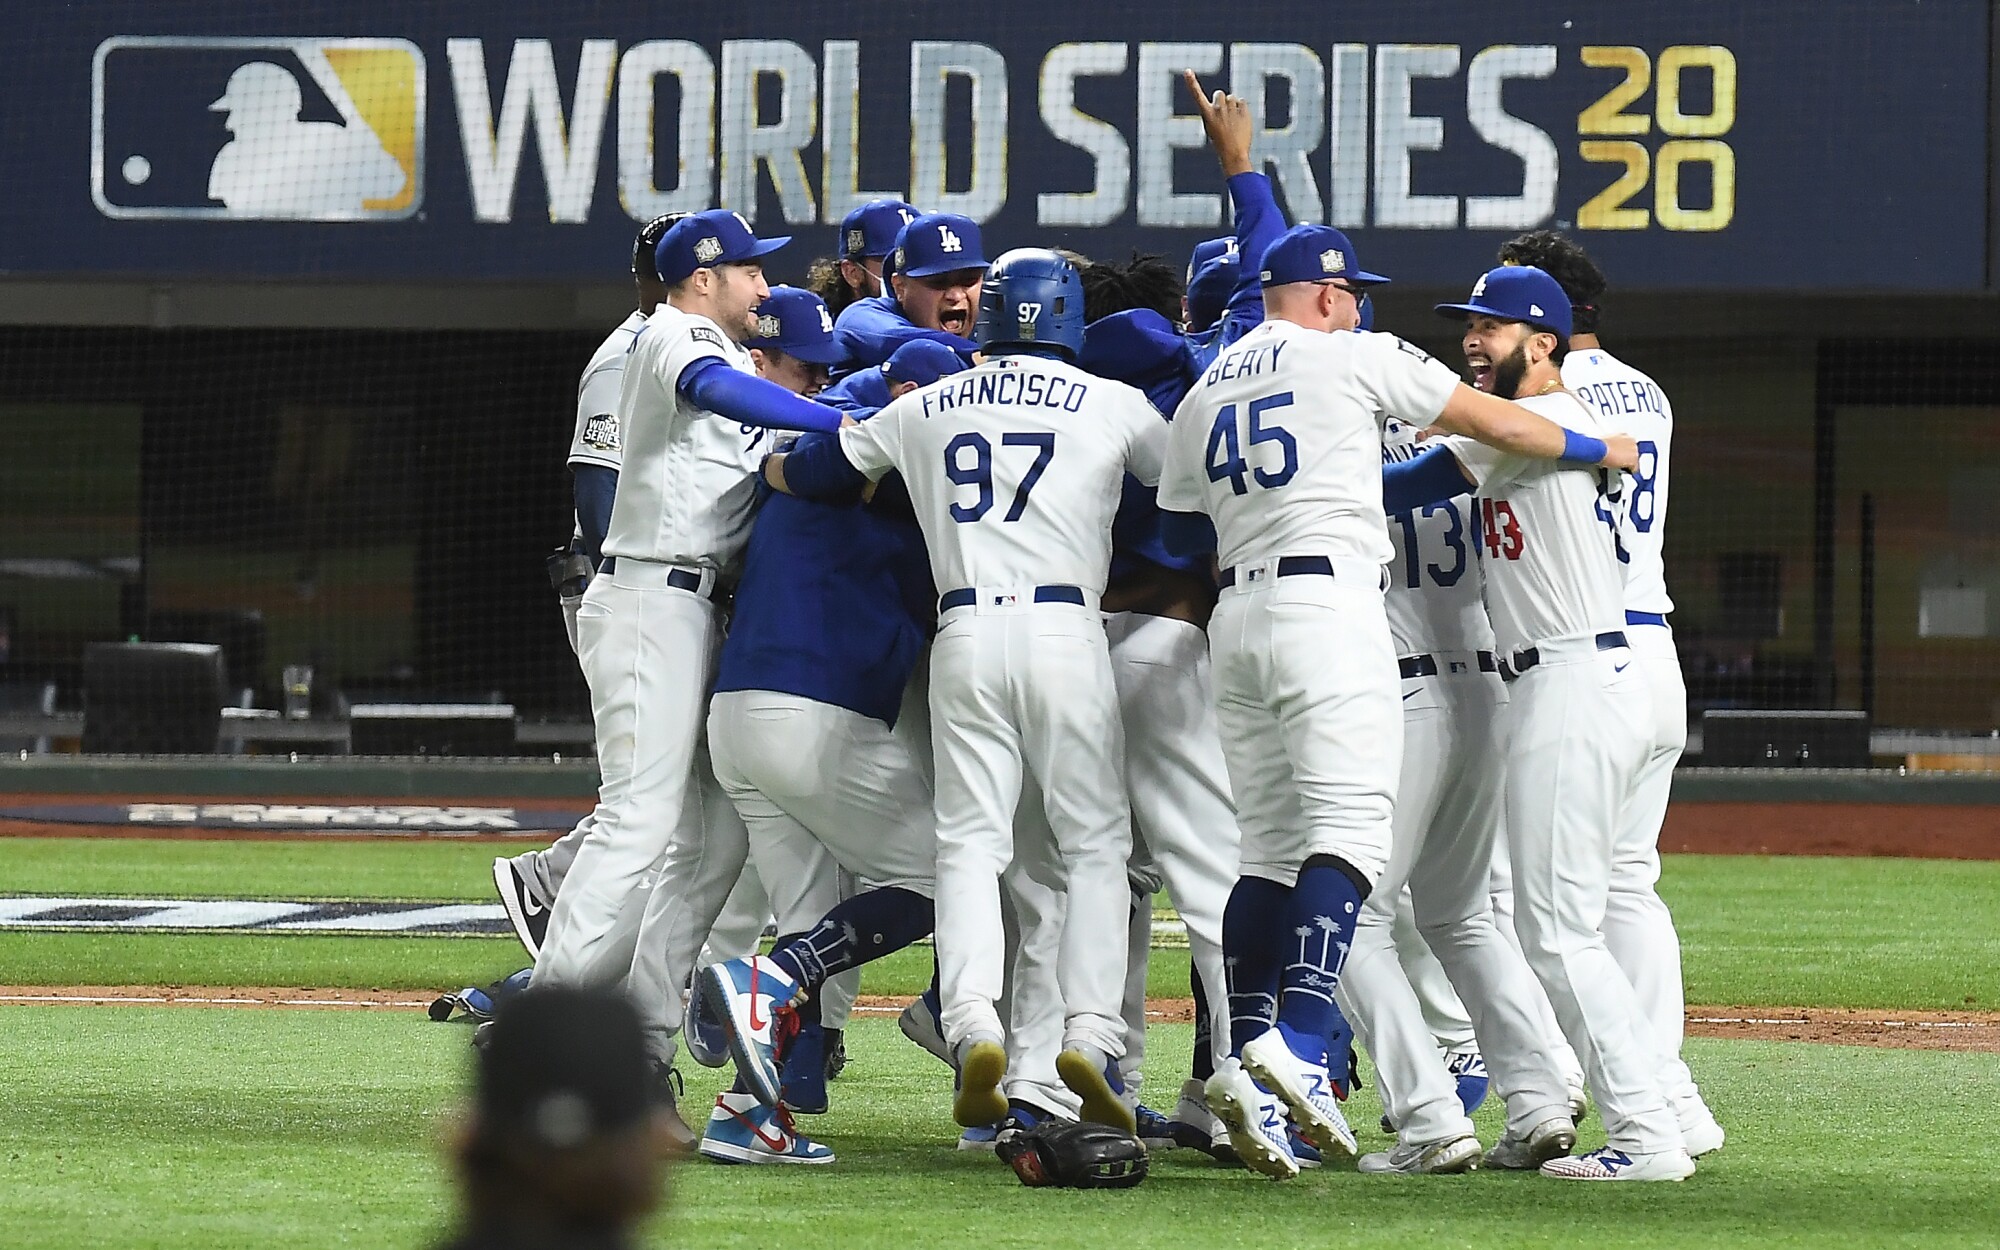 road to dodgers world series title one never before traveled los angeles times los angeles times